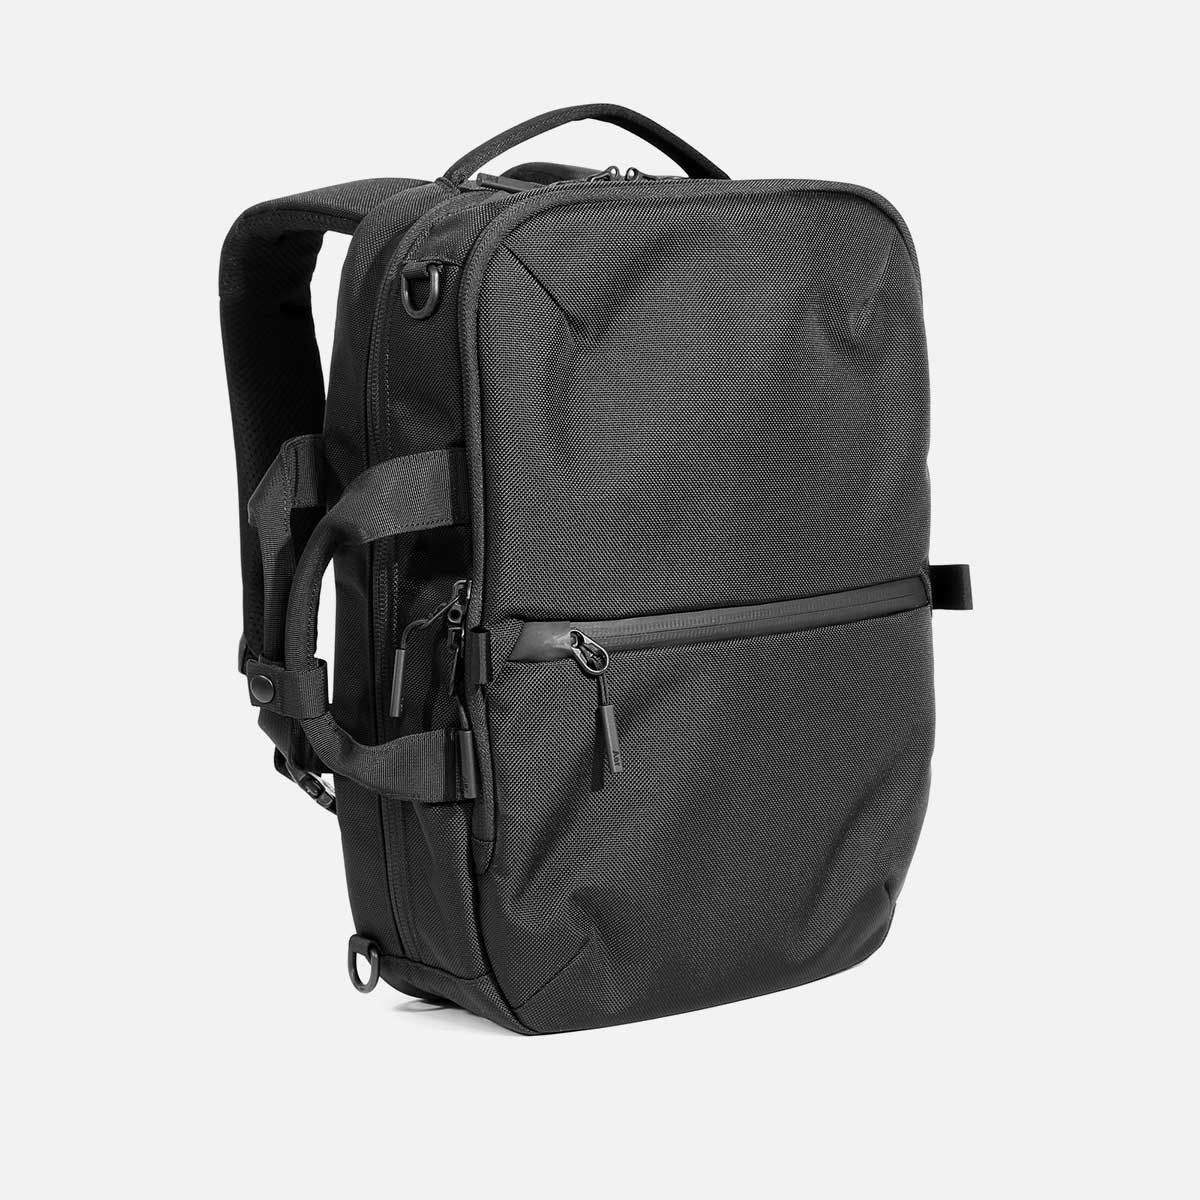 Convertible waterproof laptop backpack for work and travel with water bottle pocket